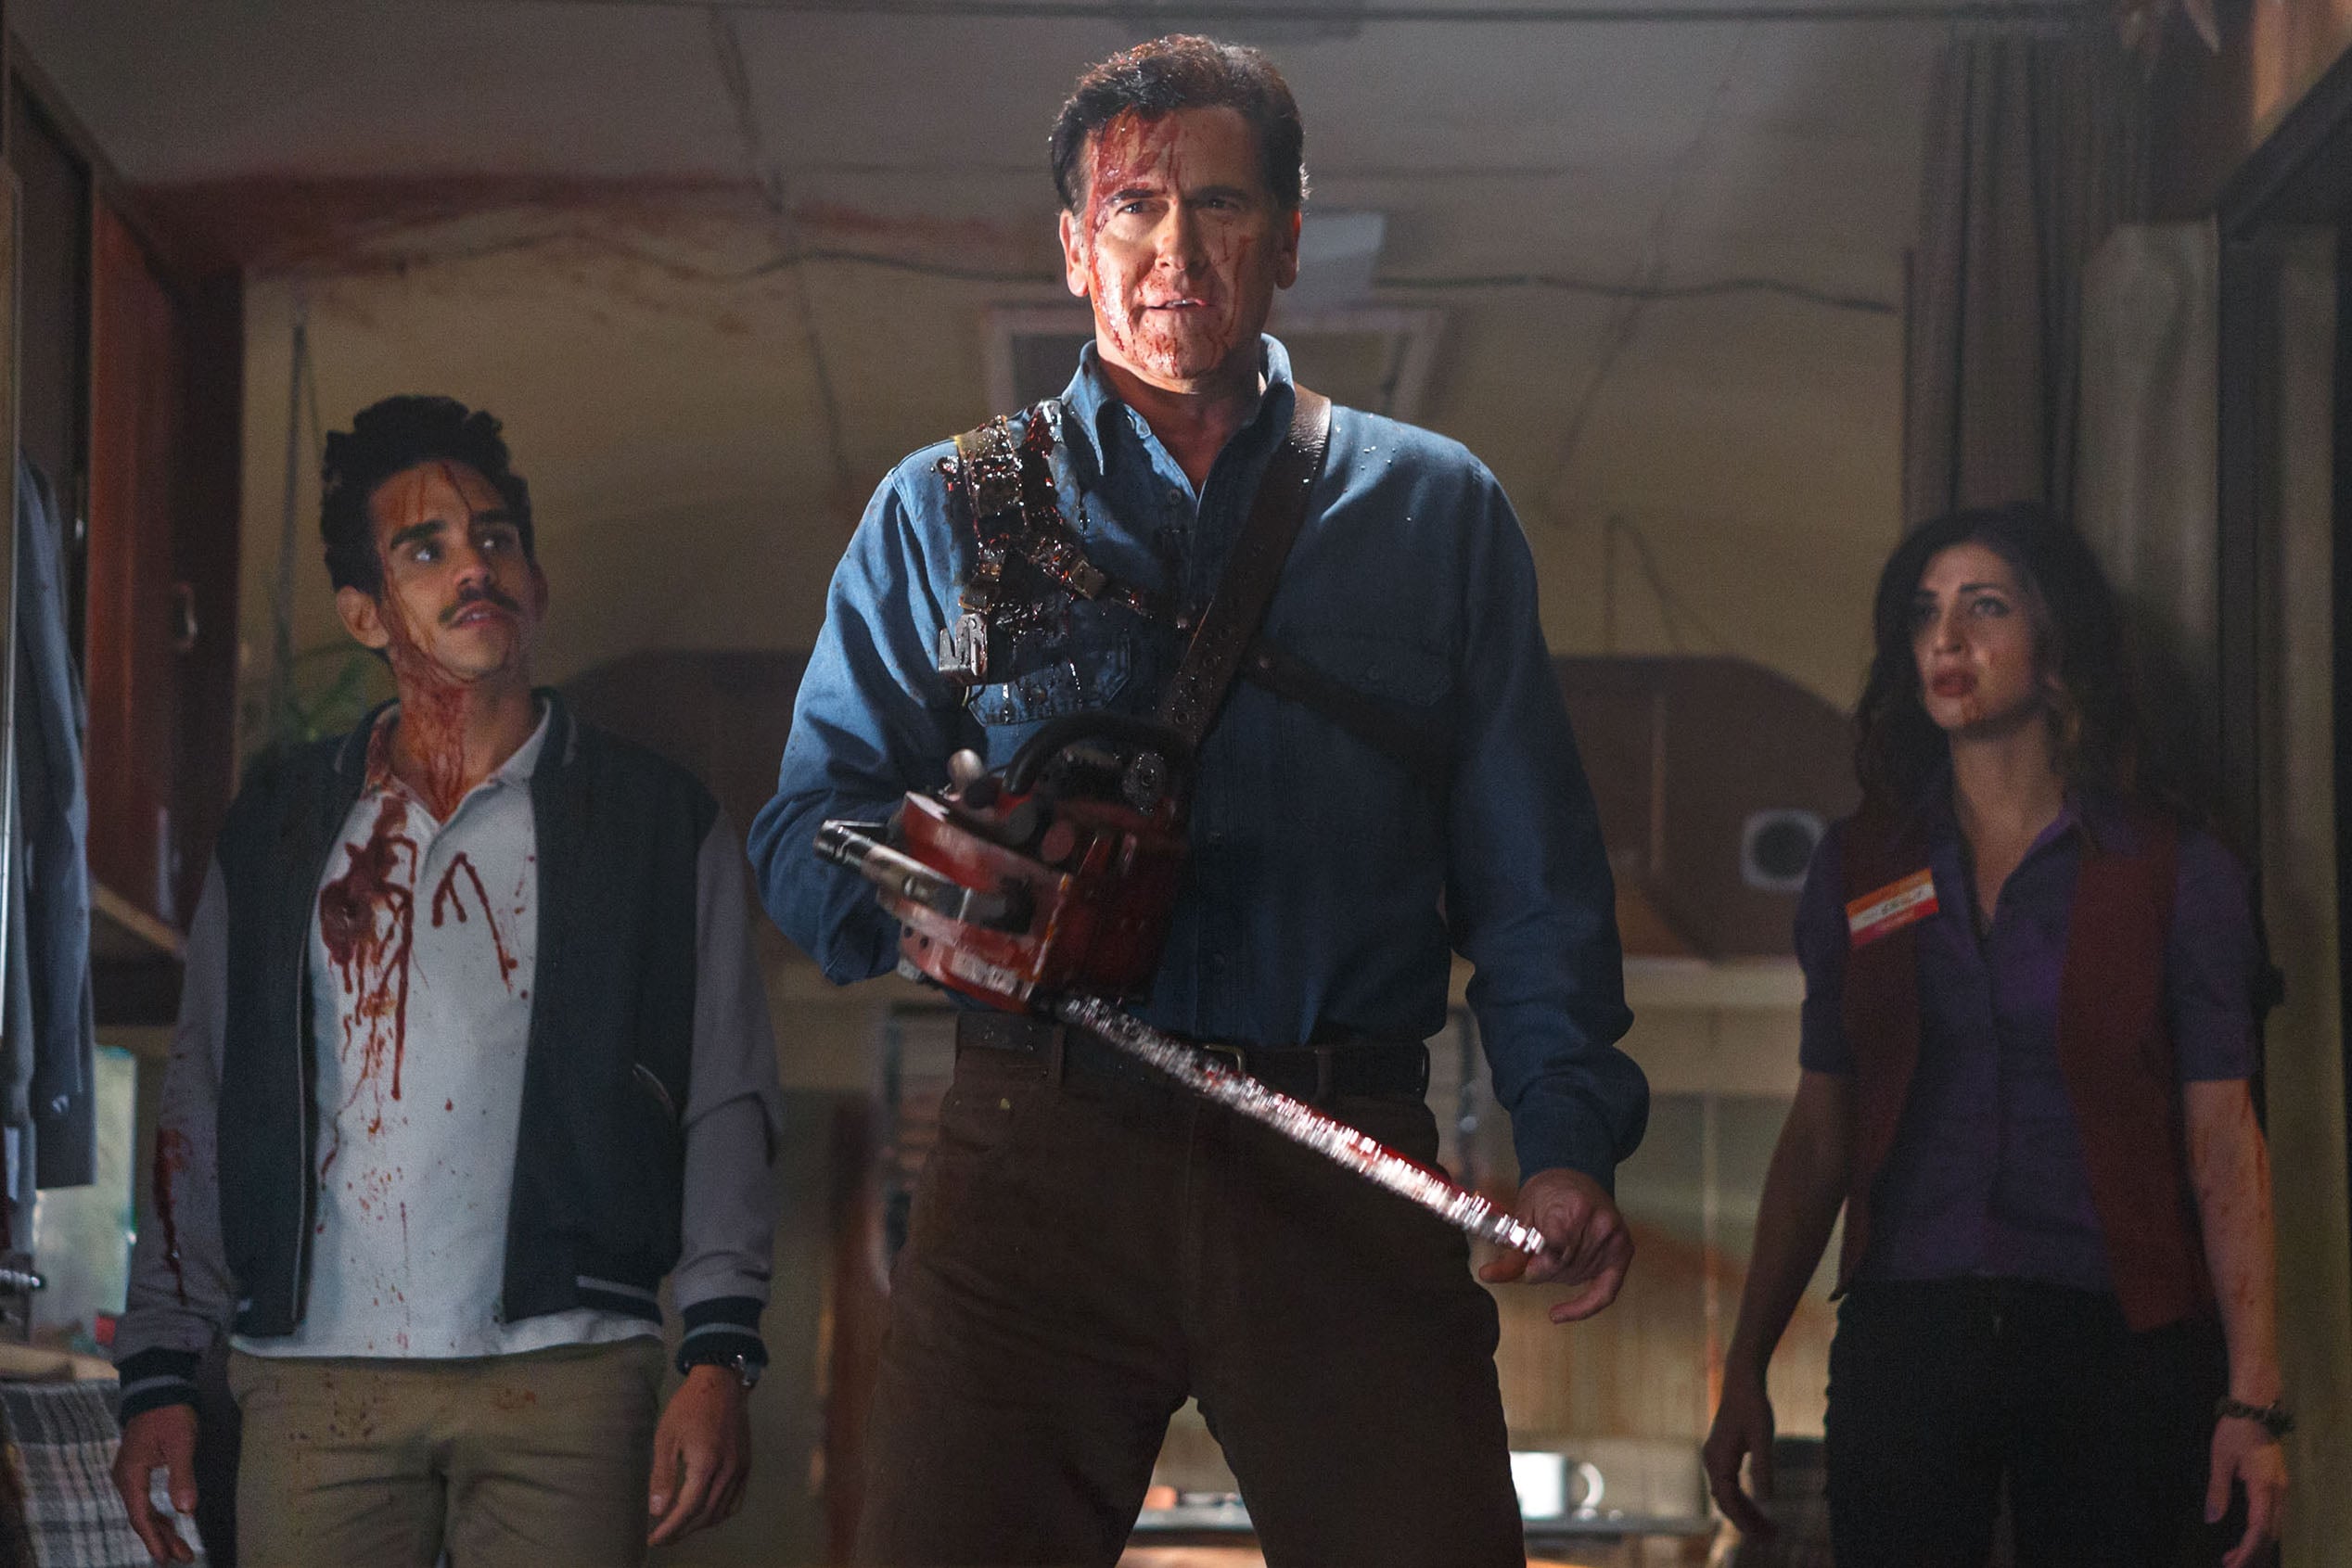 The Evil Dead' will rise again in 2015 as a Starz TV series - The